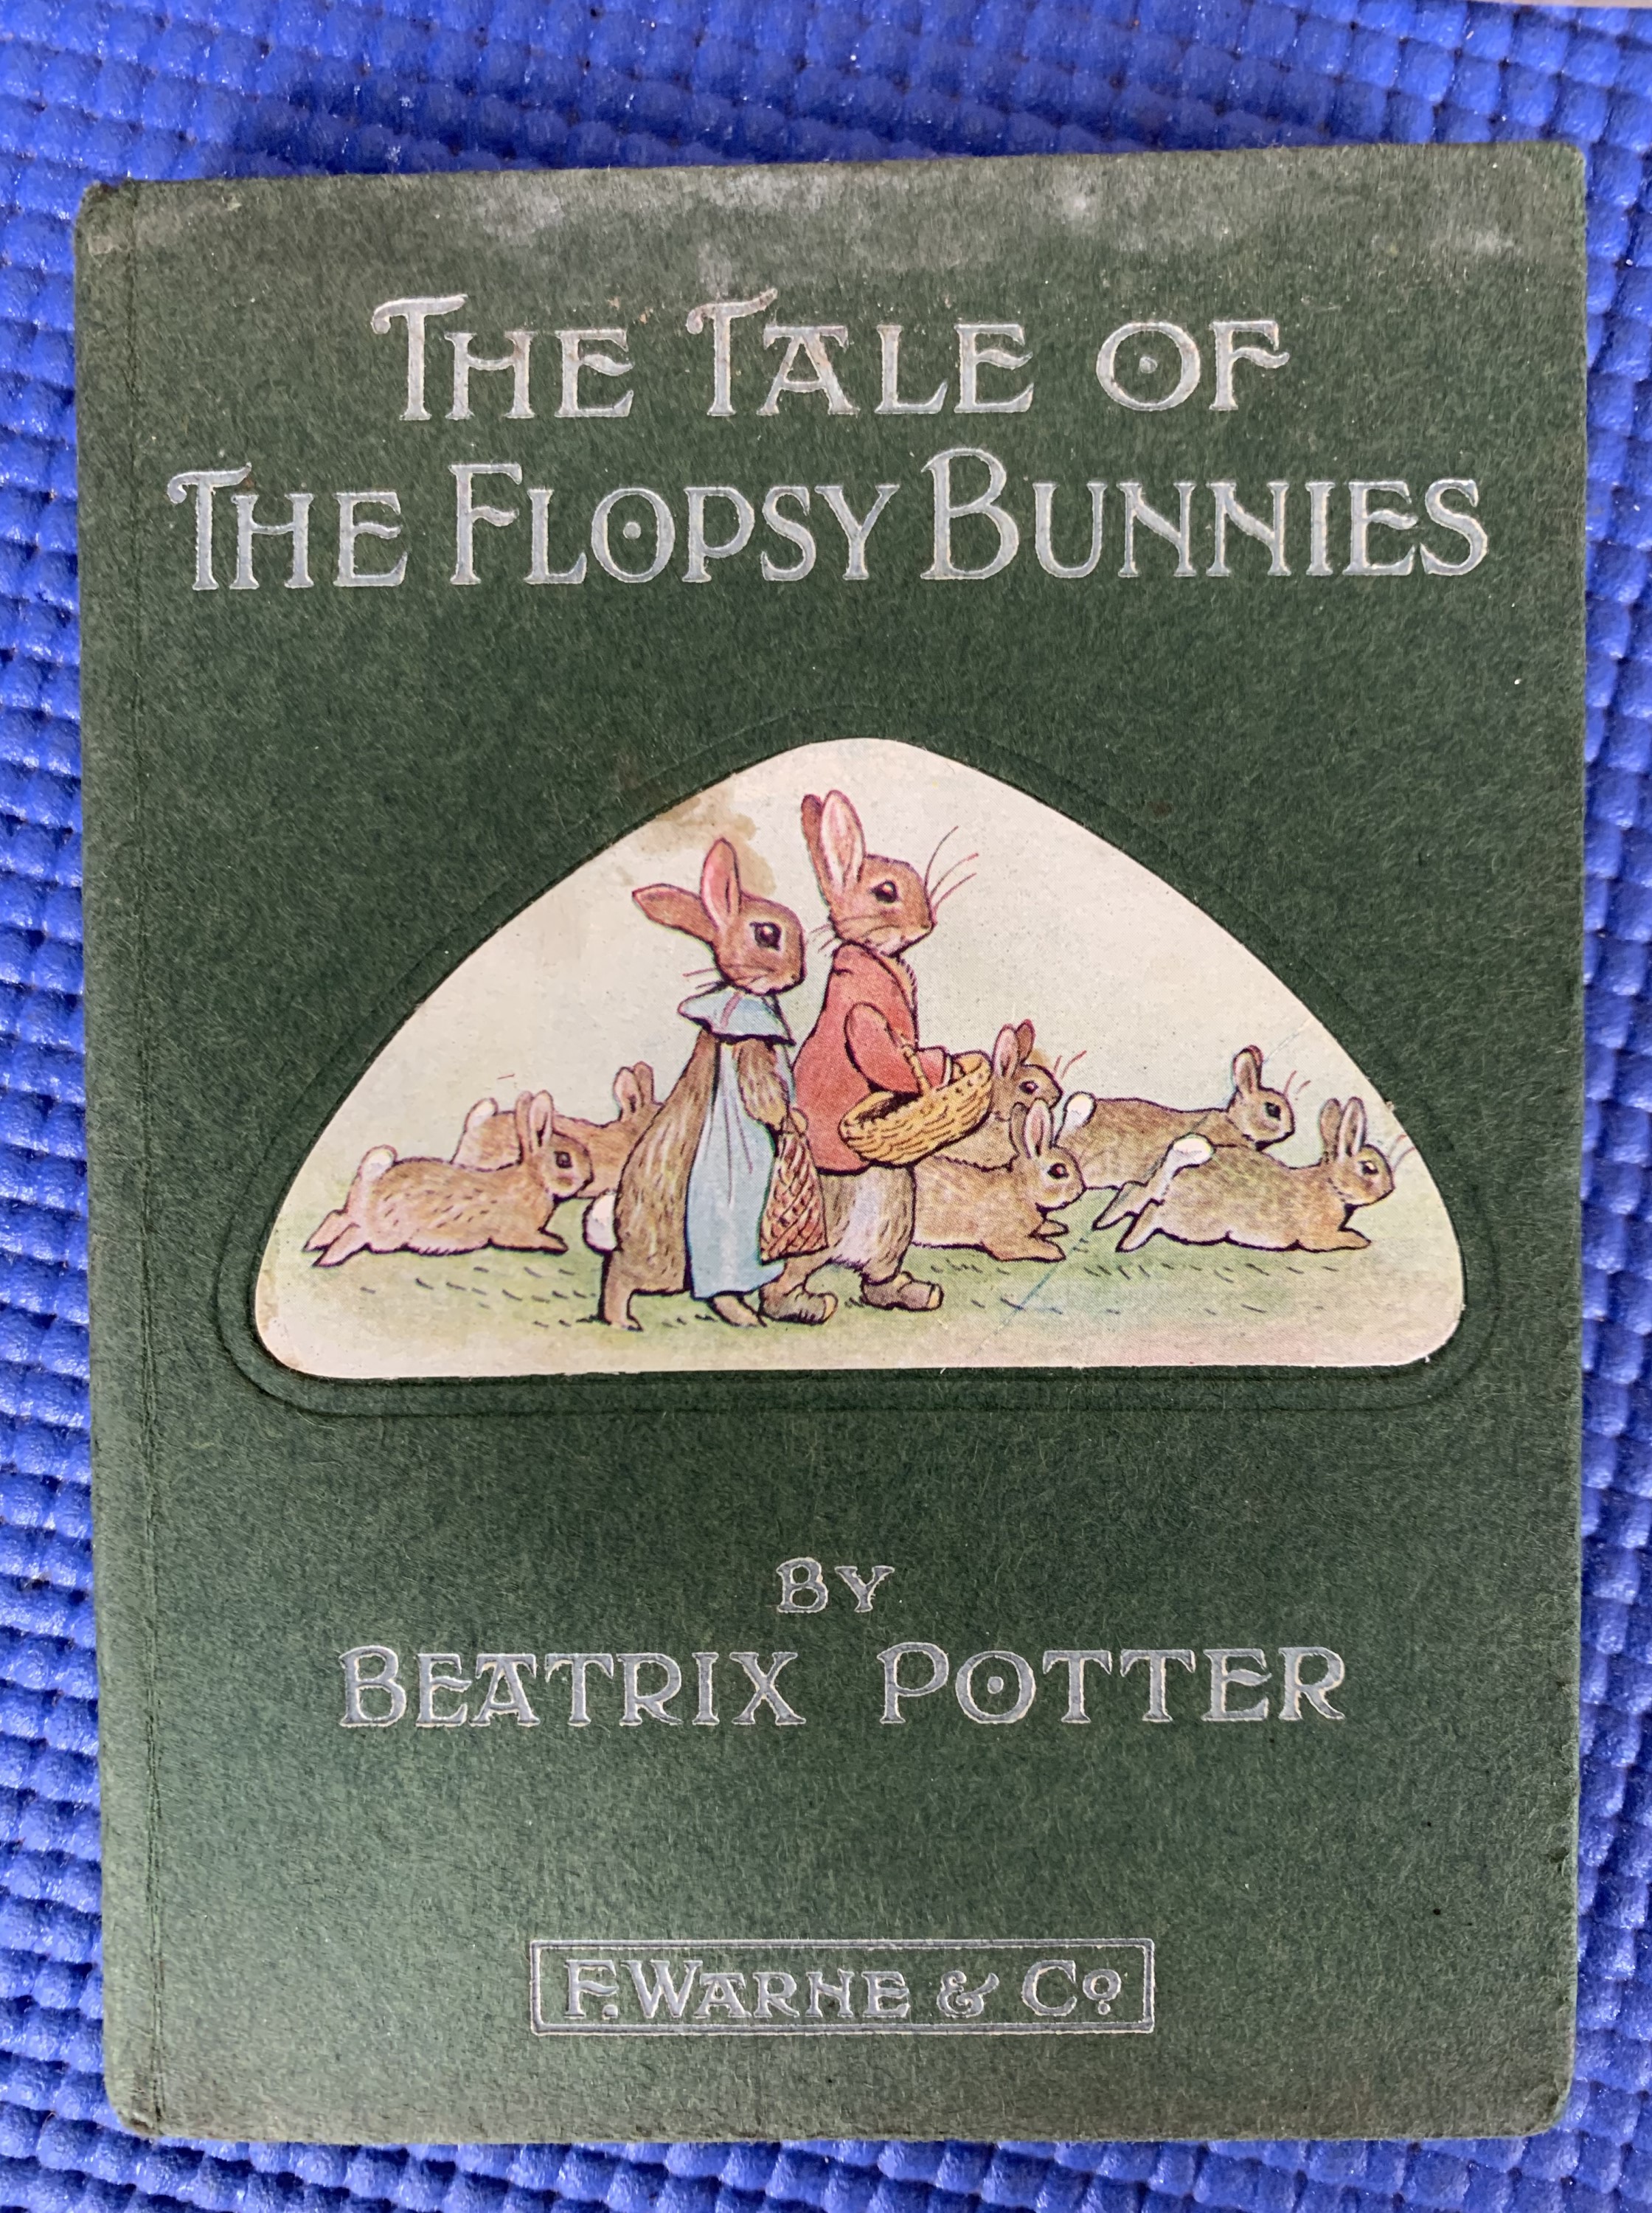 An early edition of Beatrix Potter's "The Tale of the Flopsy Bunnies", Warne, in original glassine - Image 6 of 10